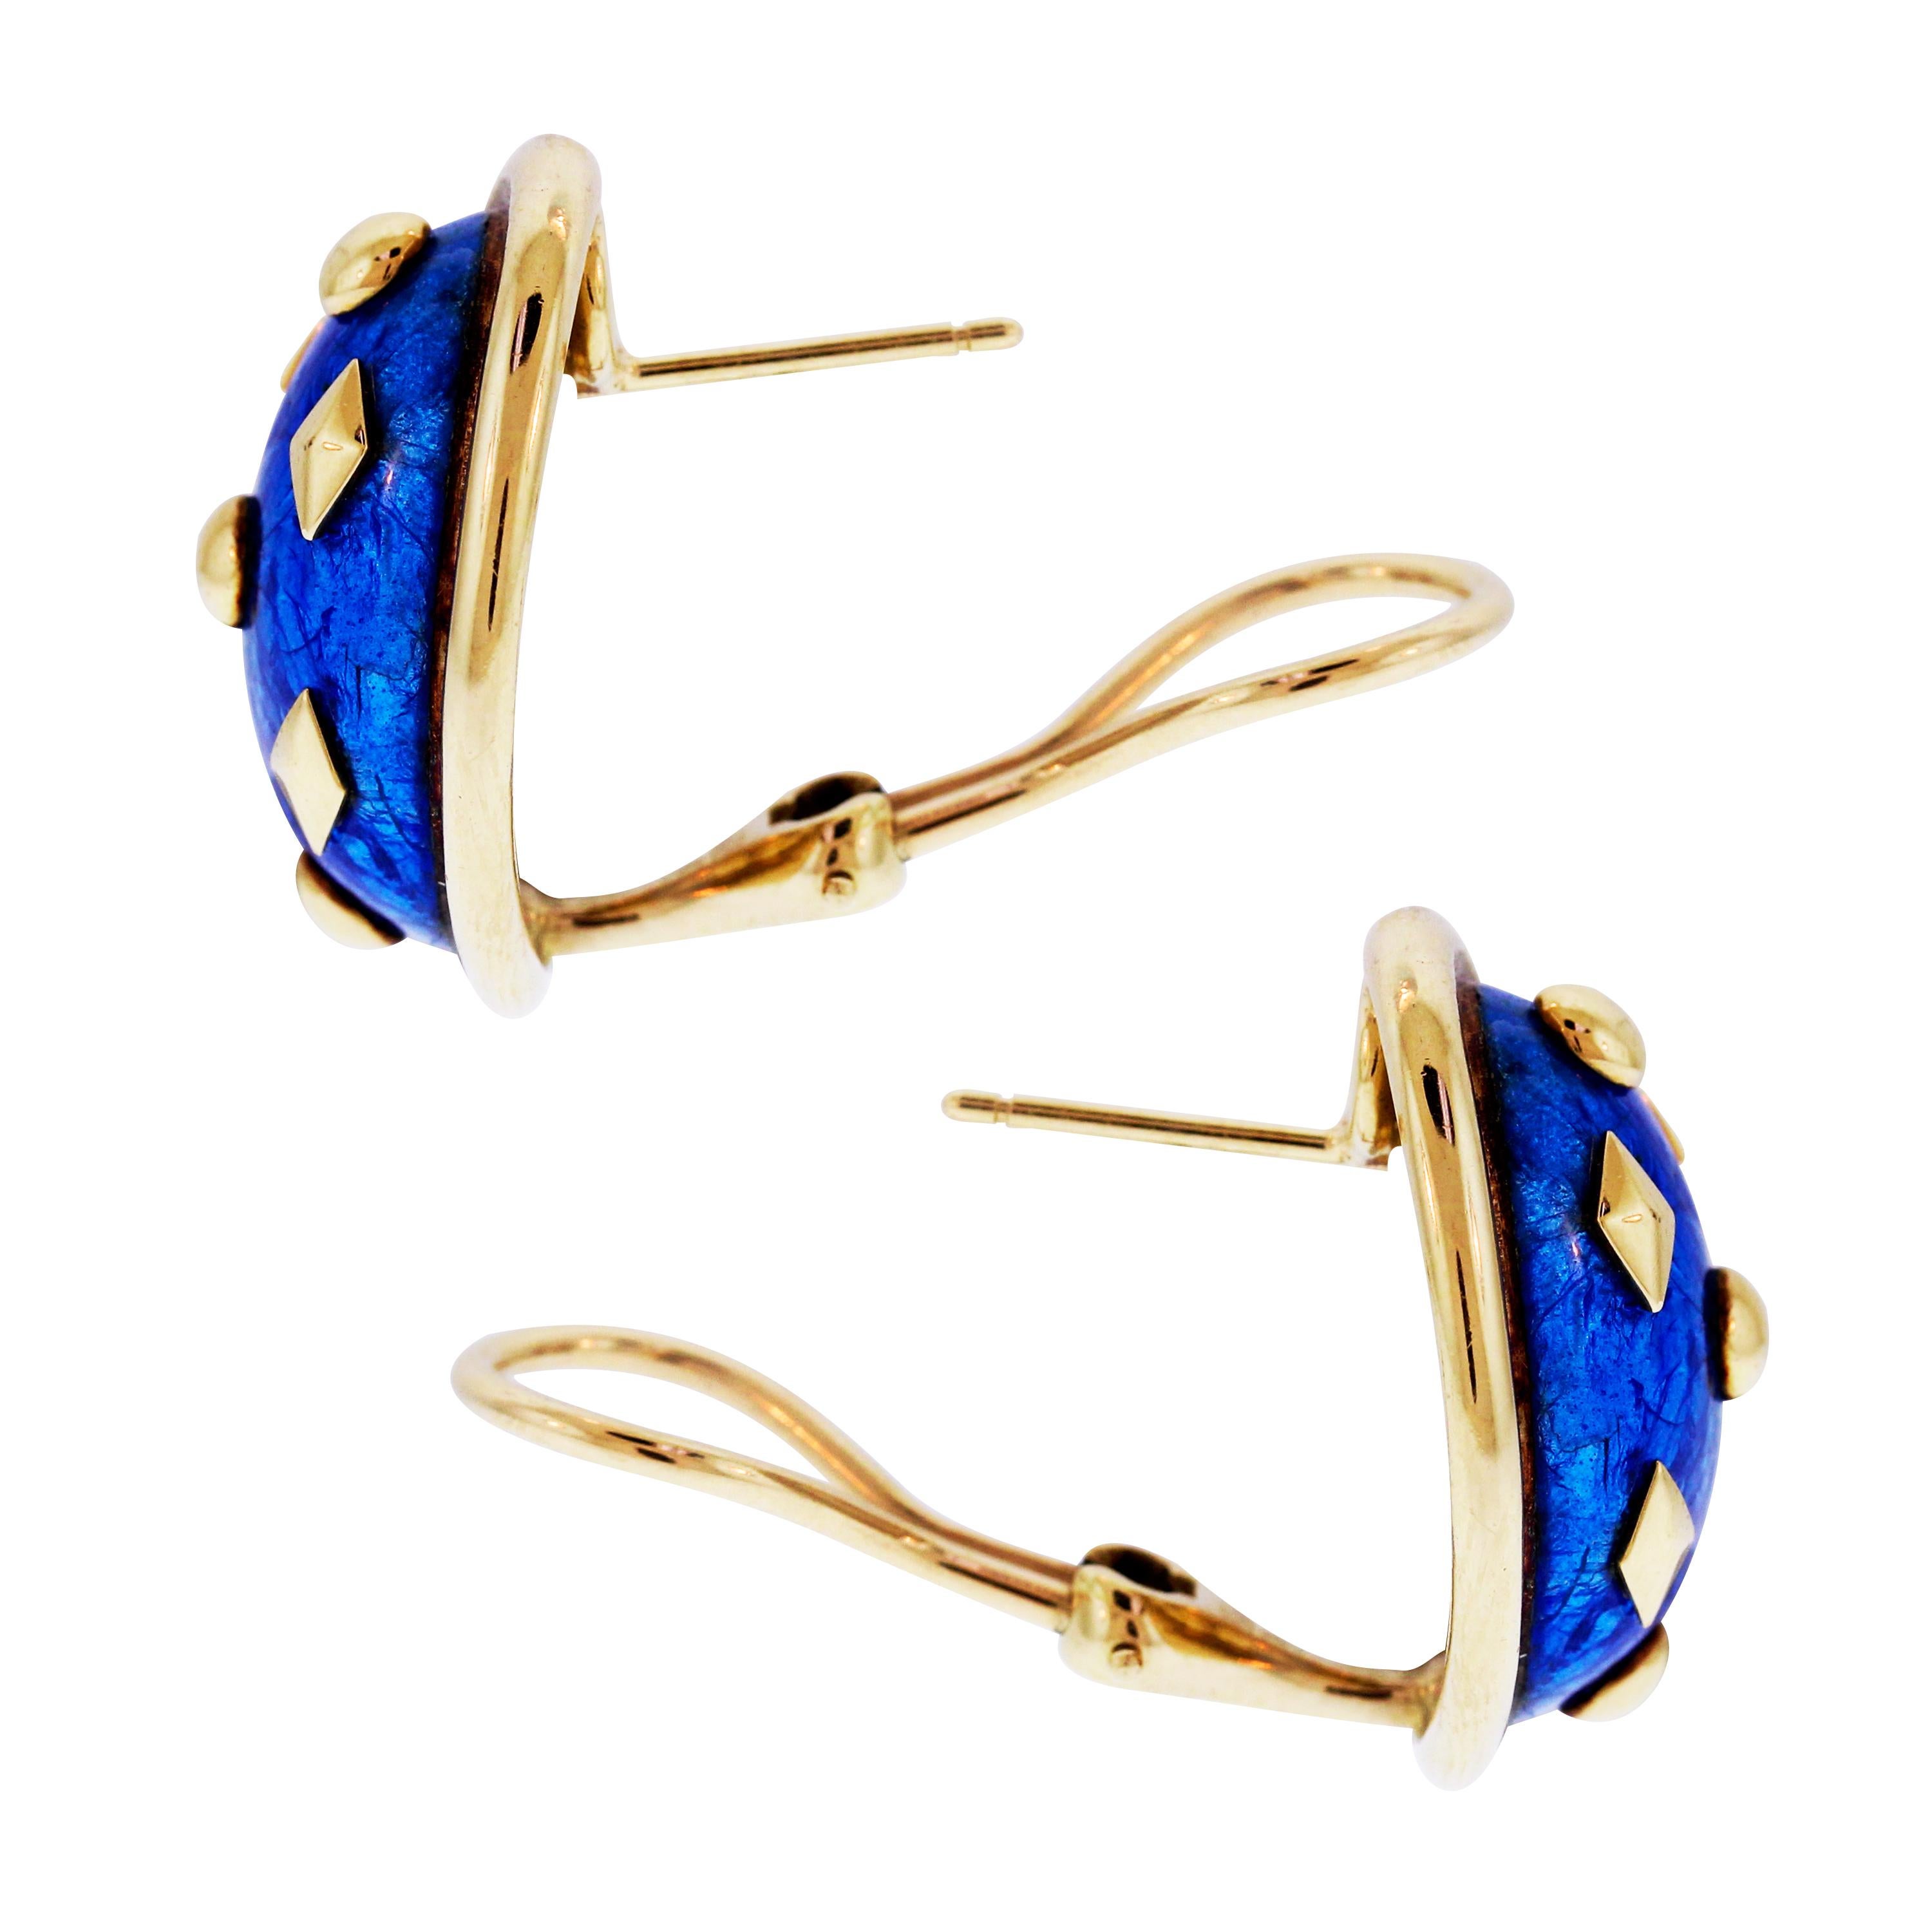 Tiffany & Co. Schlumberger 18K Yellow Gold earrings with Blue Enamel 

Created by Jean Schlumberger for Tiffany & Co

Beautifully done in blue enamel

Earrings are 0.85 inch in length by 0.63 inch in width

Signed: Tiffany, Schlumberger